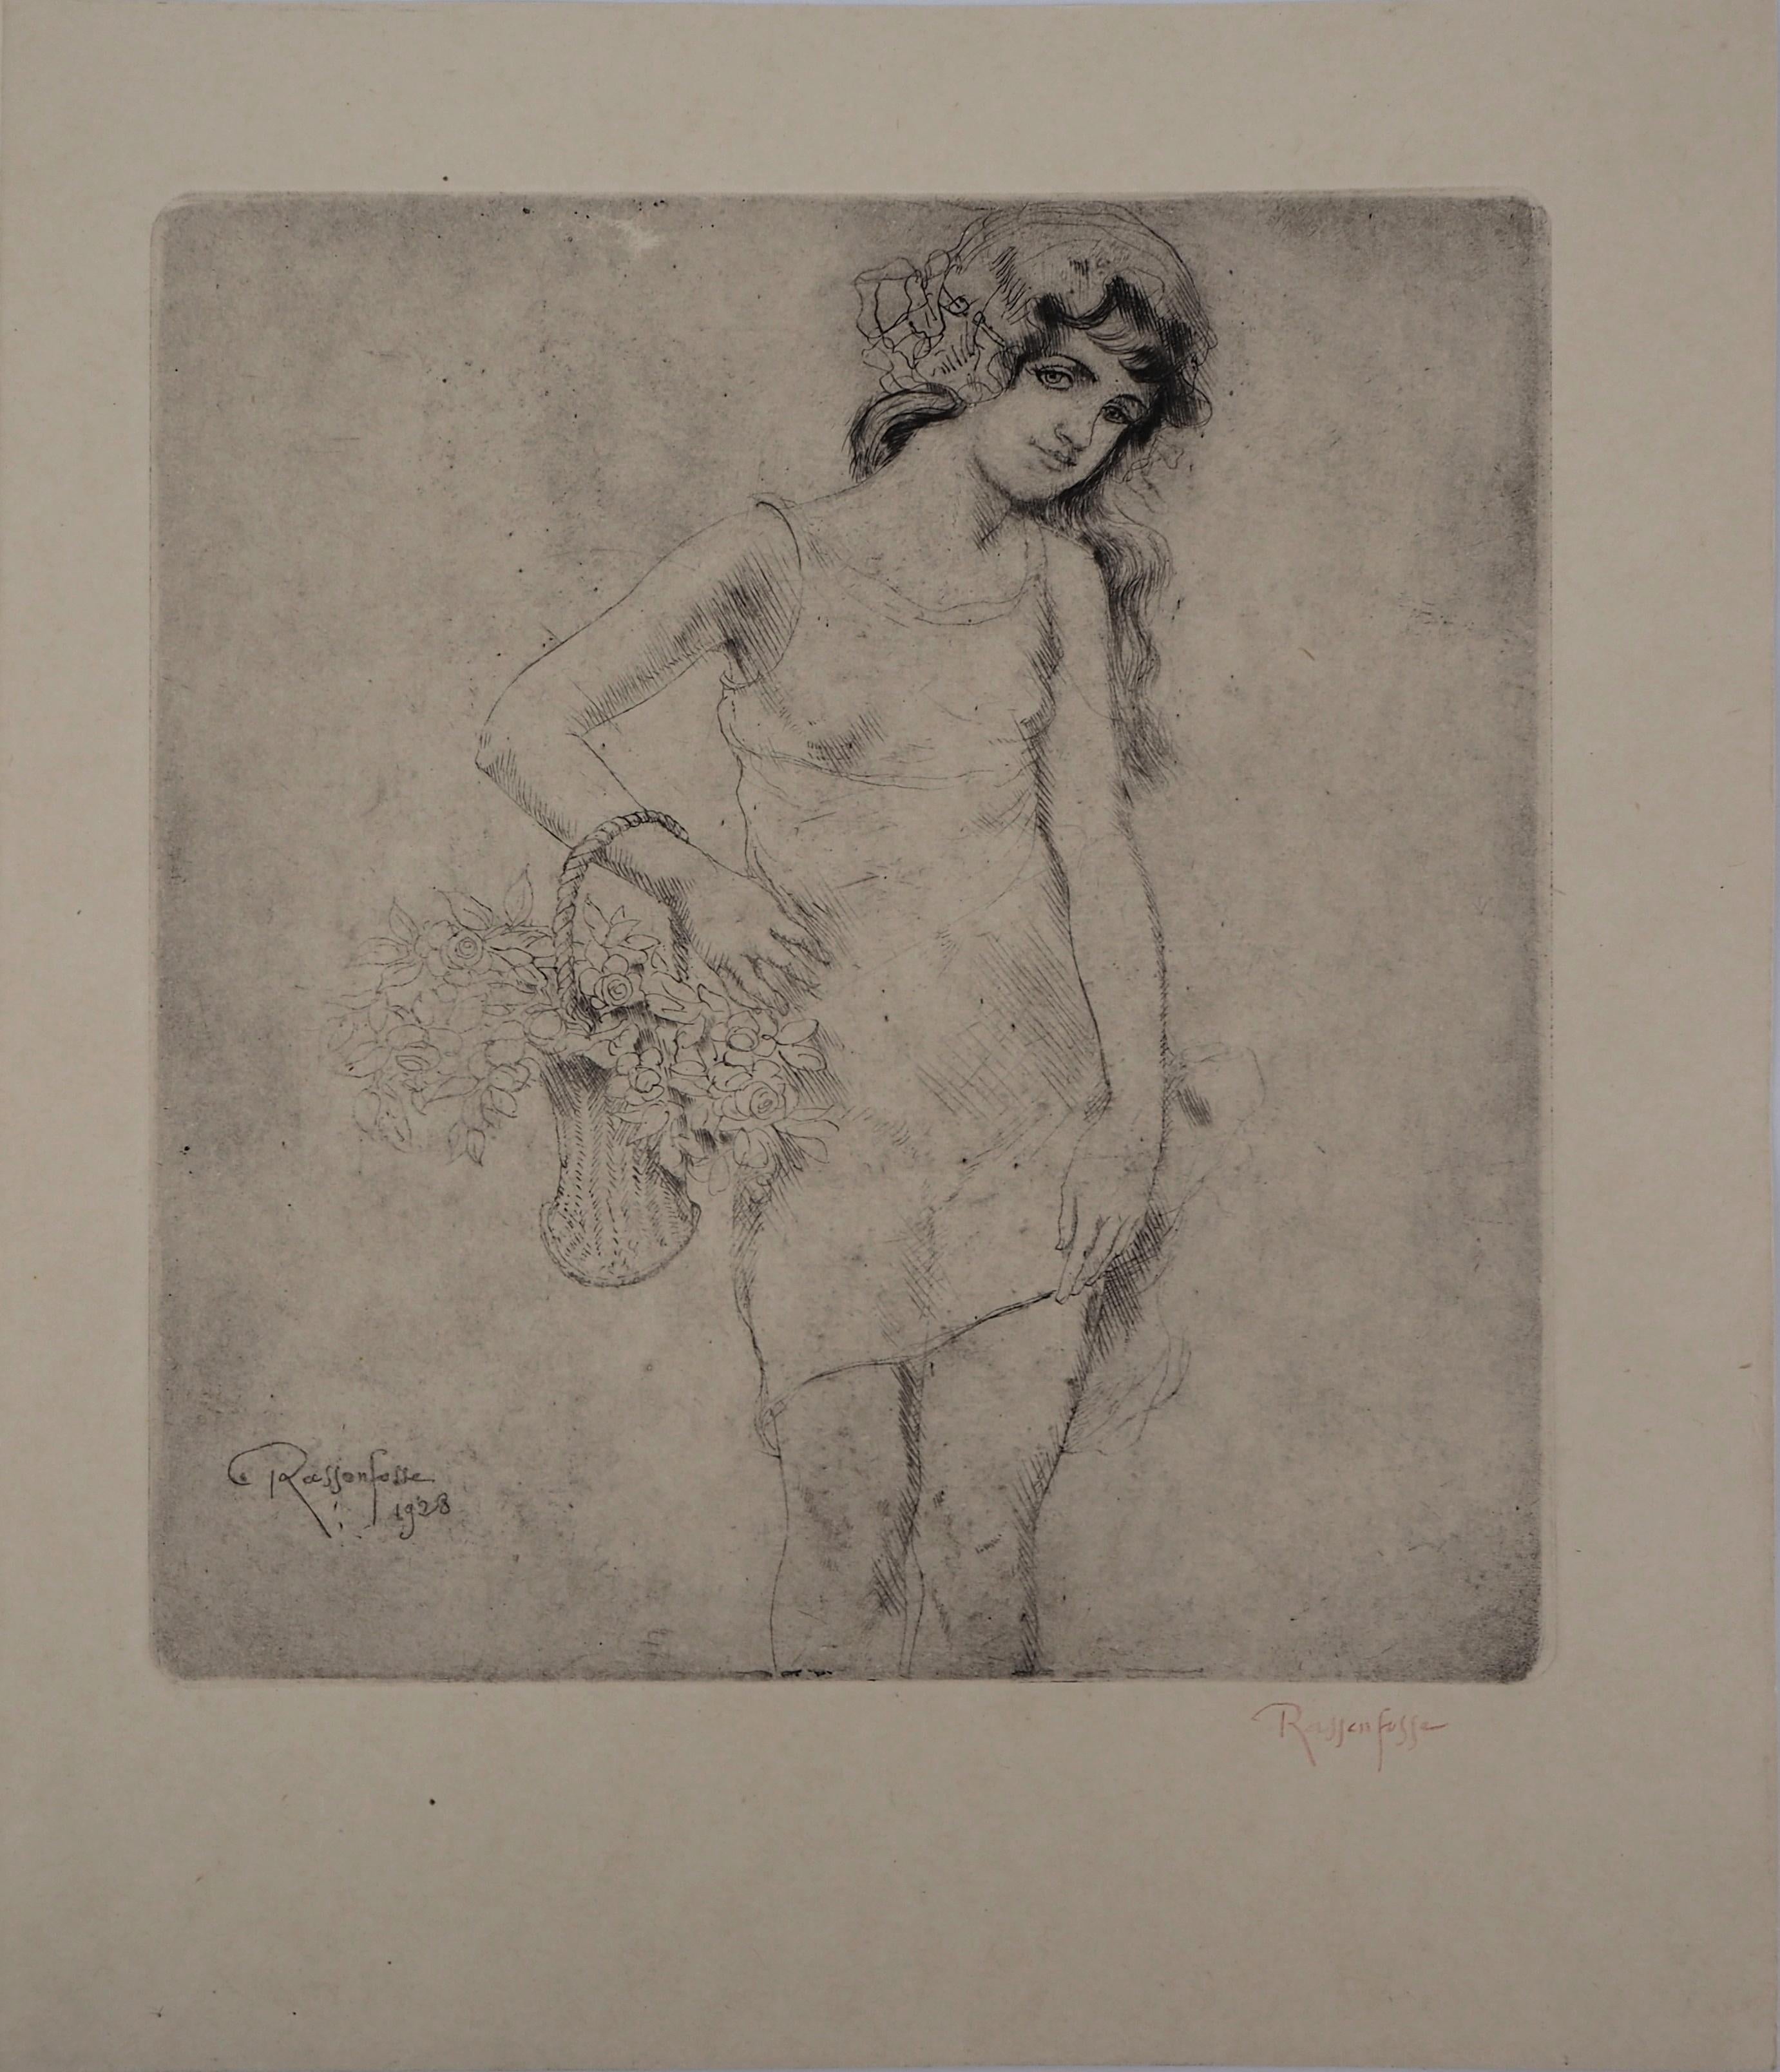 Armand Rassenfosse Figurative Print - Young Girl with Flowers - Original drypoint etching, Handsigned, 1928